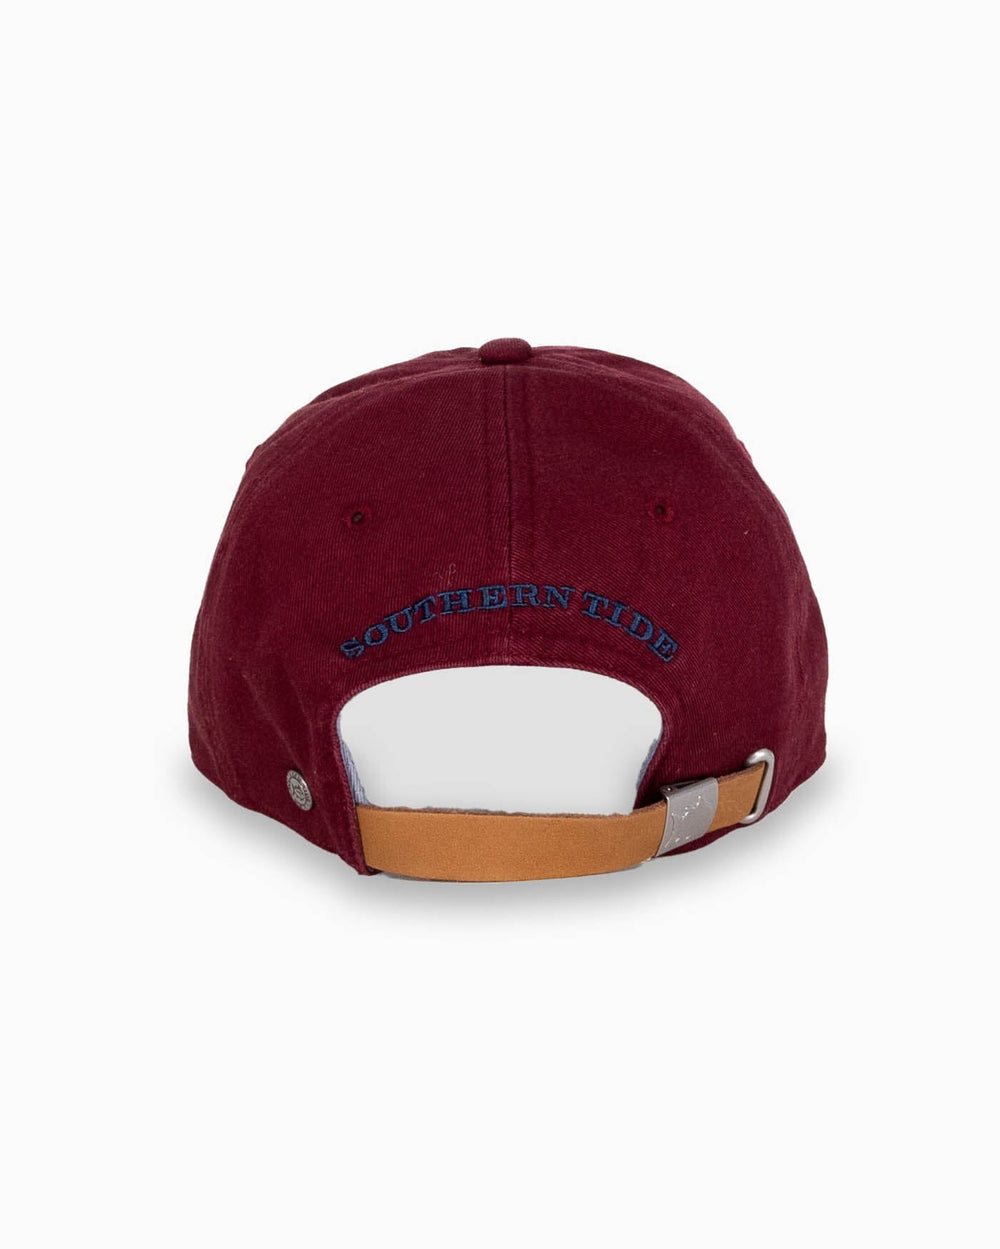 The back view of the Southern Tide mini-skipjack-leather-strap-hat-3 by Southern Tide - Maroon